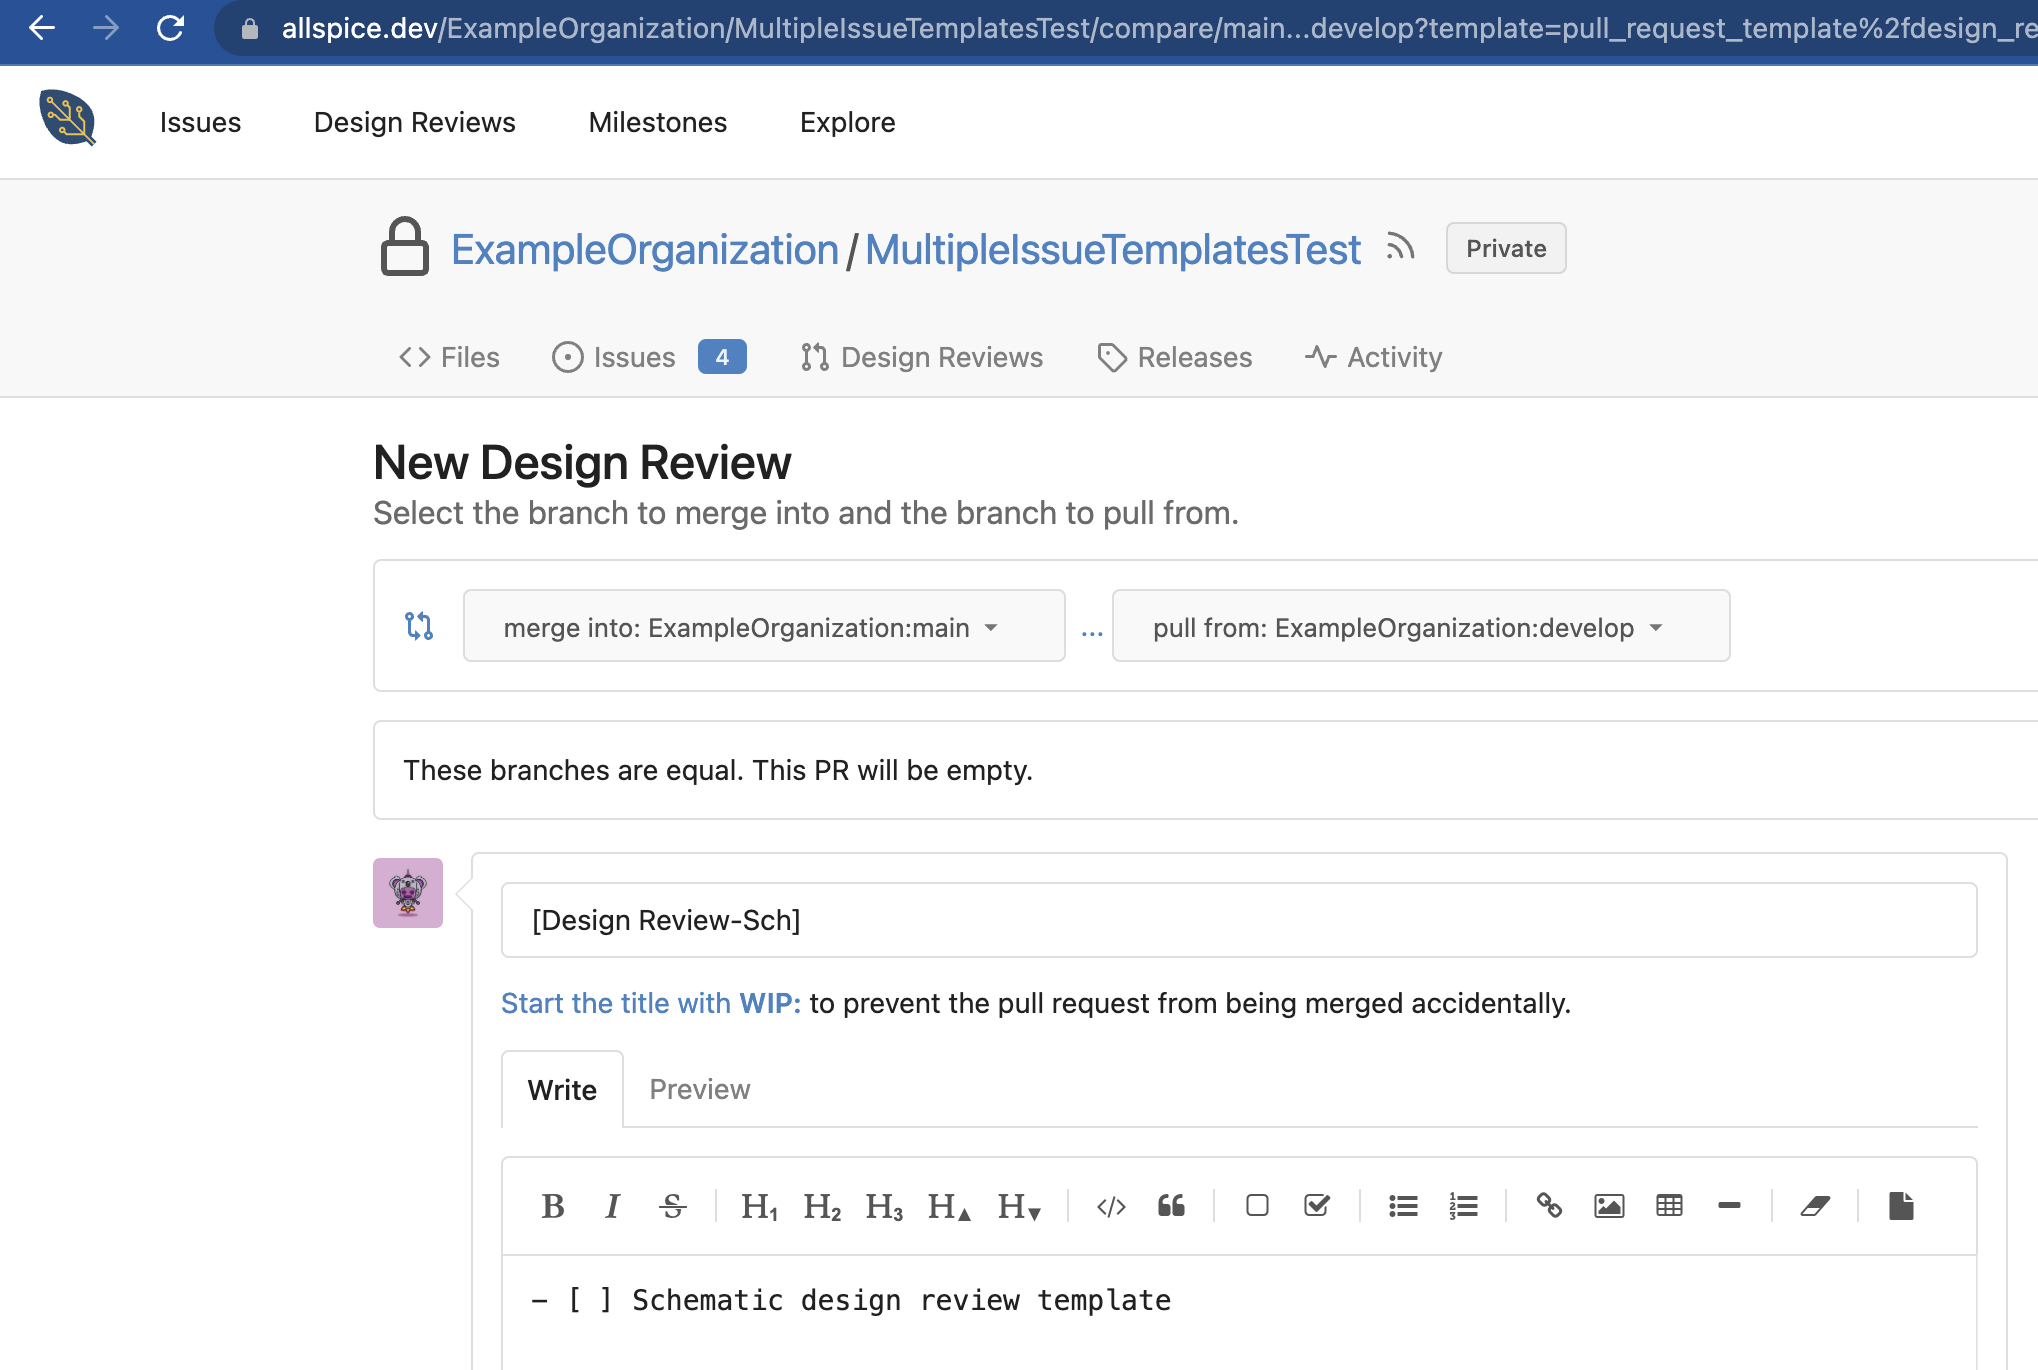 Design review (pull request) template. New design review page shown, with "write" tab open at the bottom.